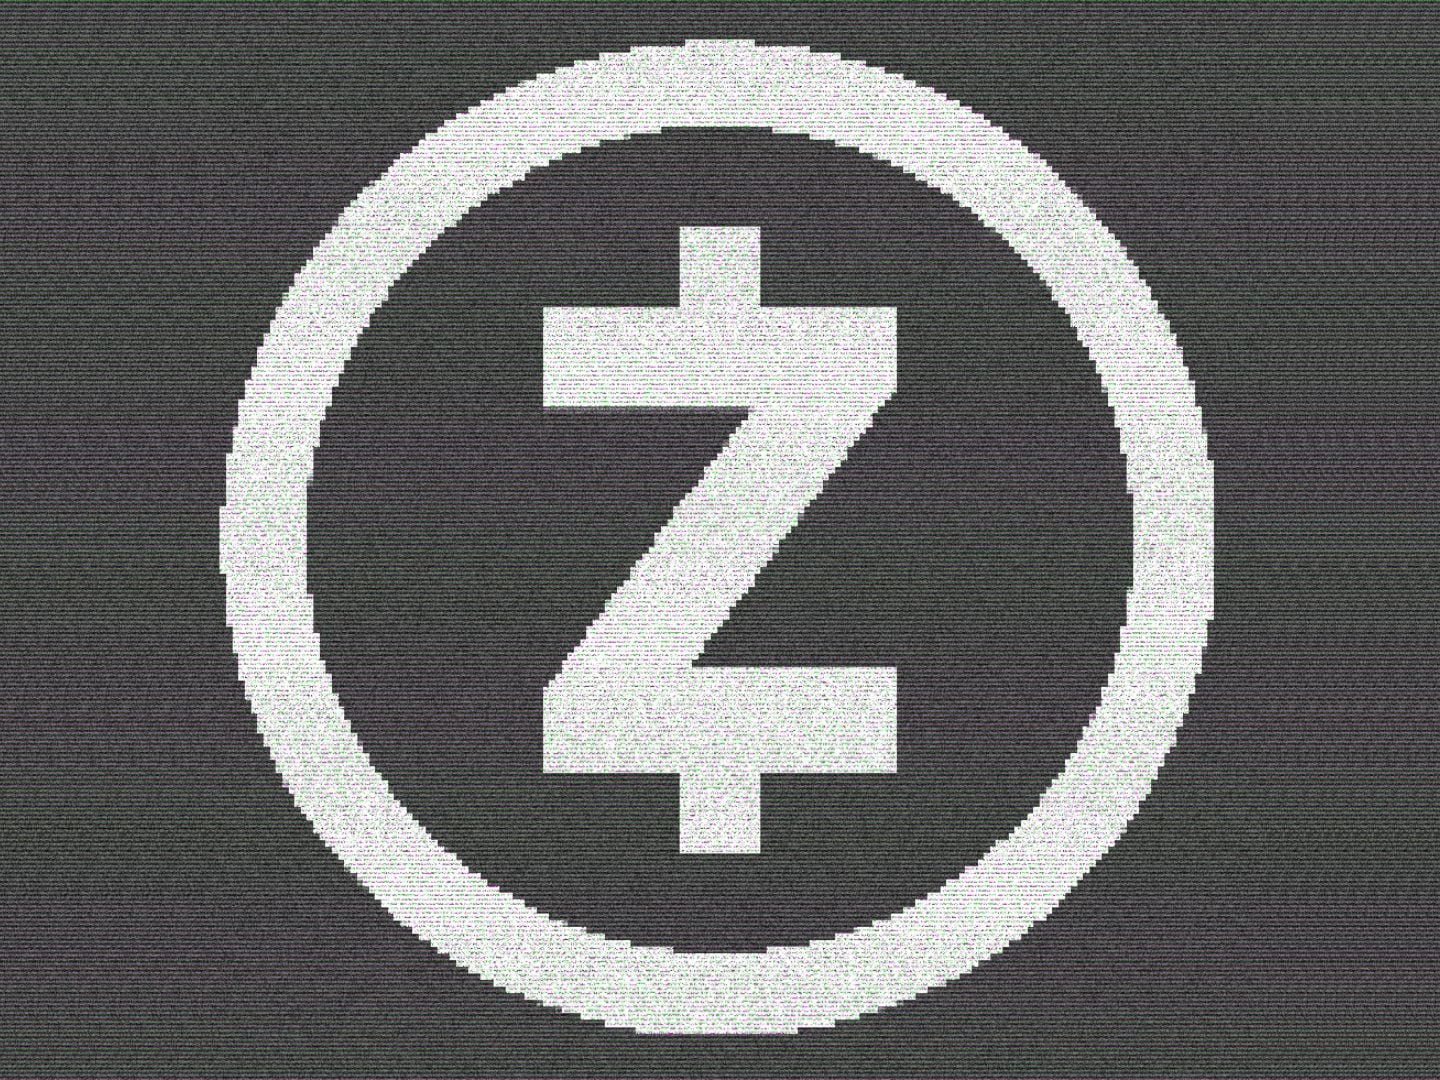 (z.cash, modified by CoinDesk)